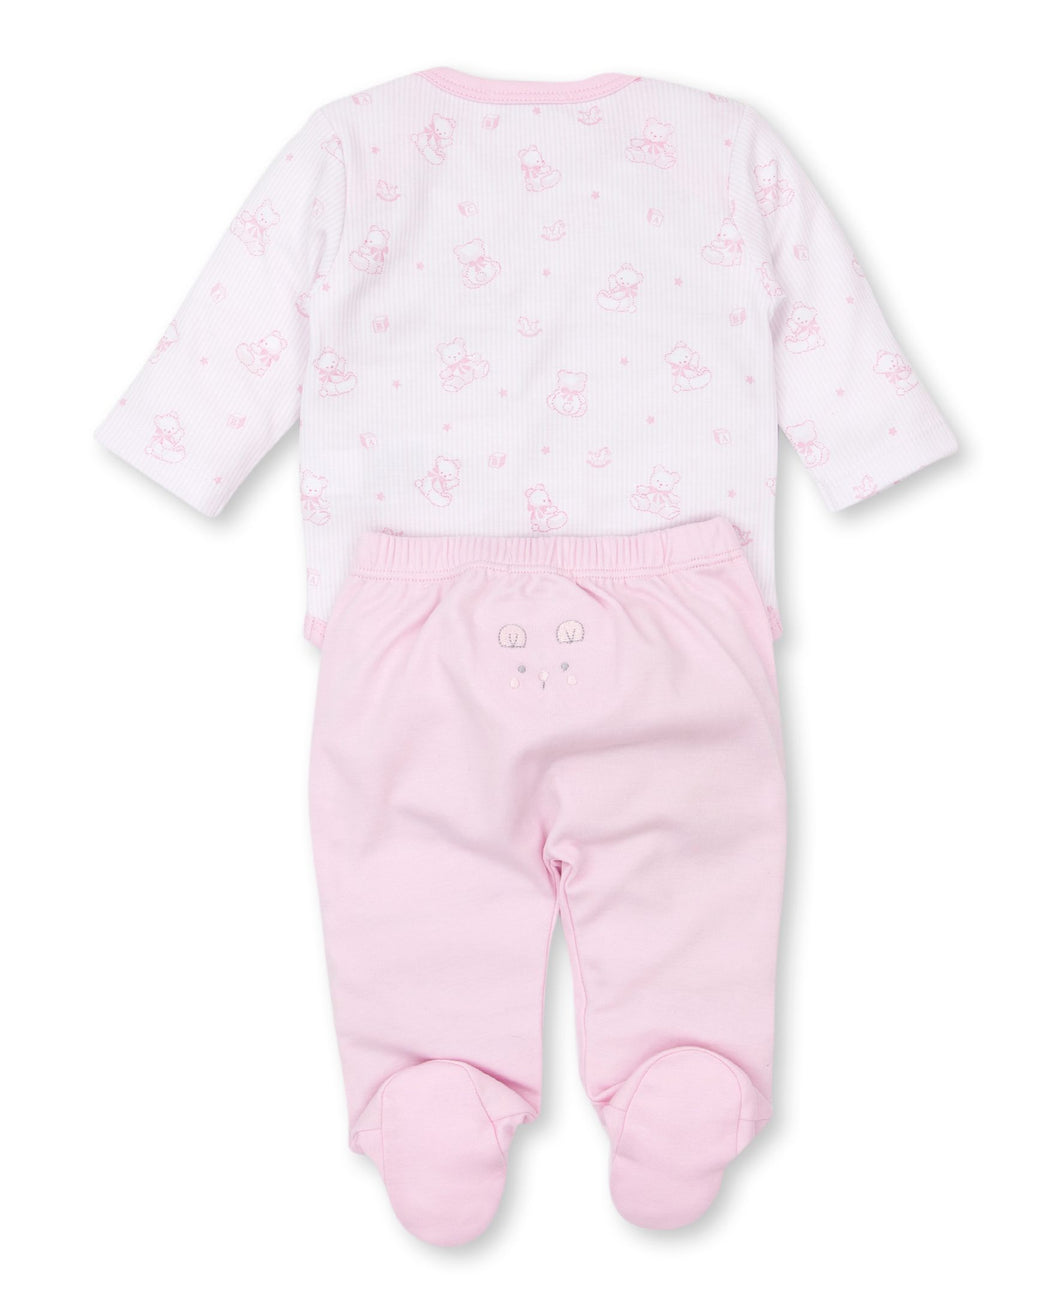 Bearly Believable Footed Pant Set Mix - Pink